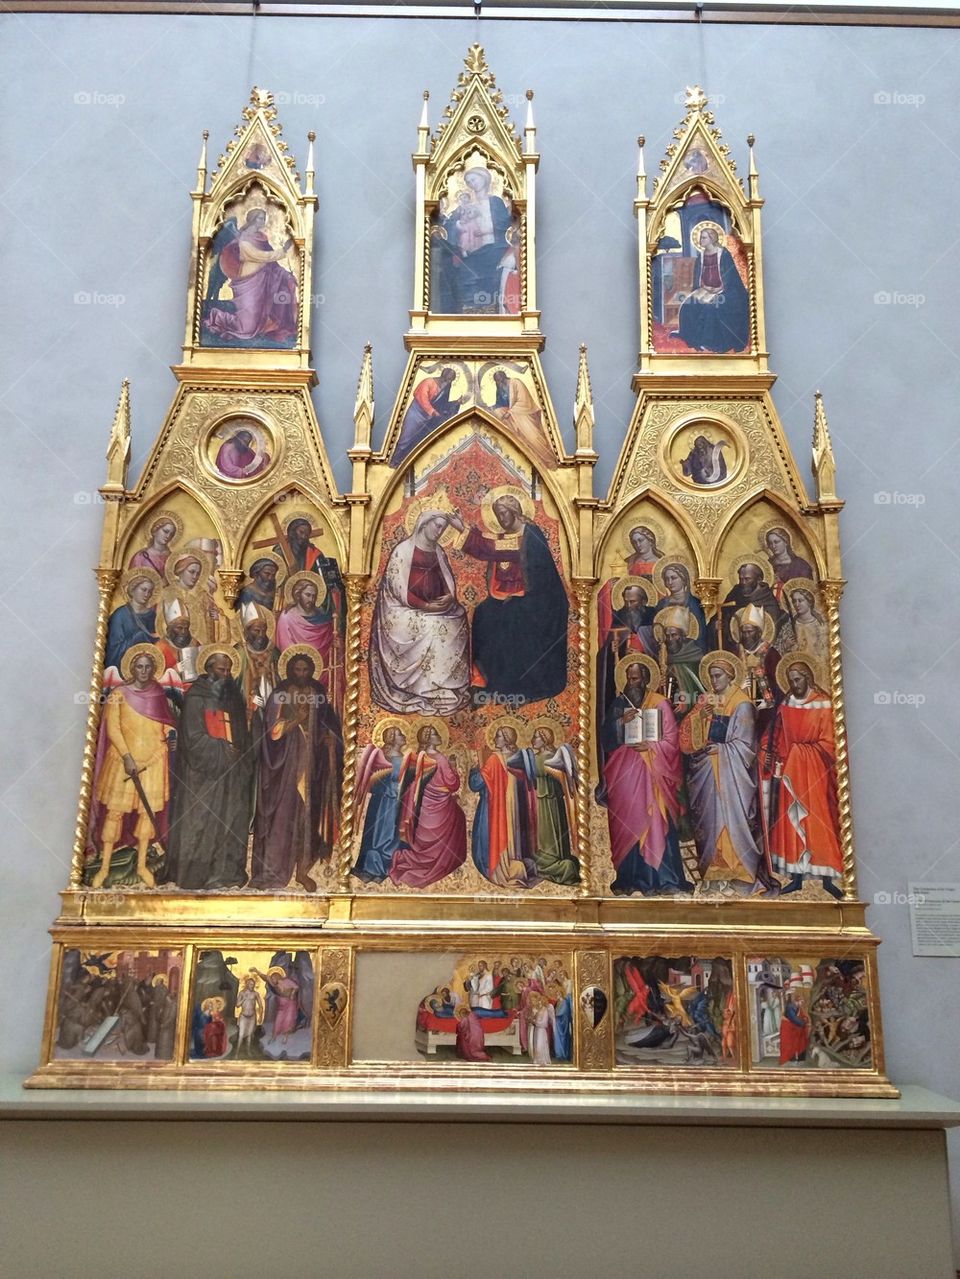 The Coronation of the Virgen with Saints